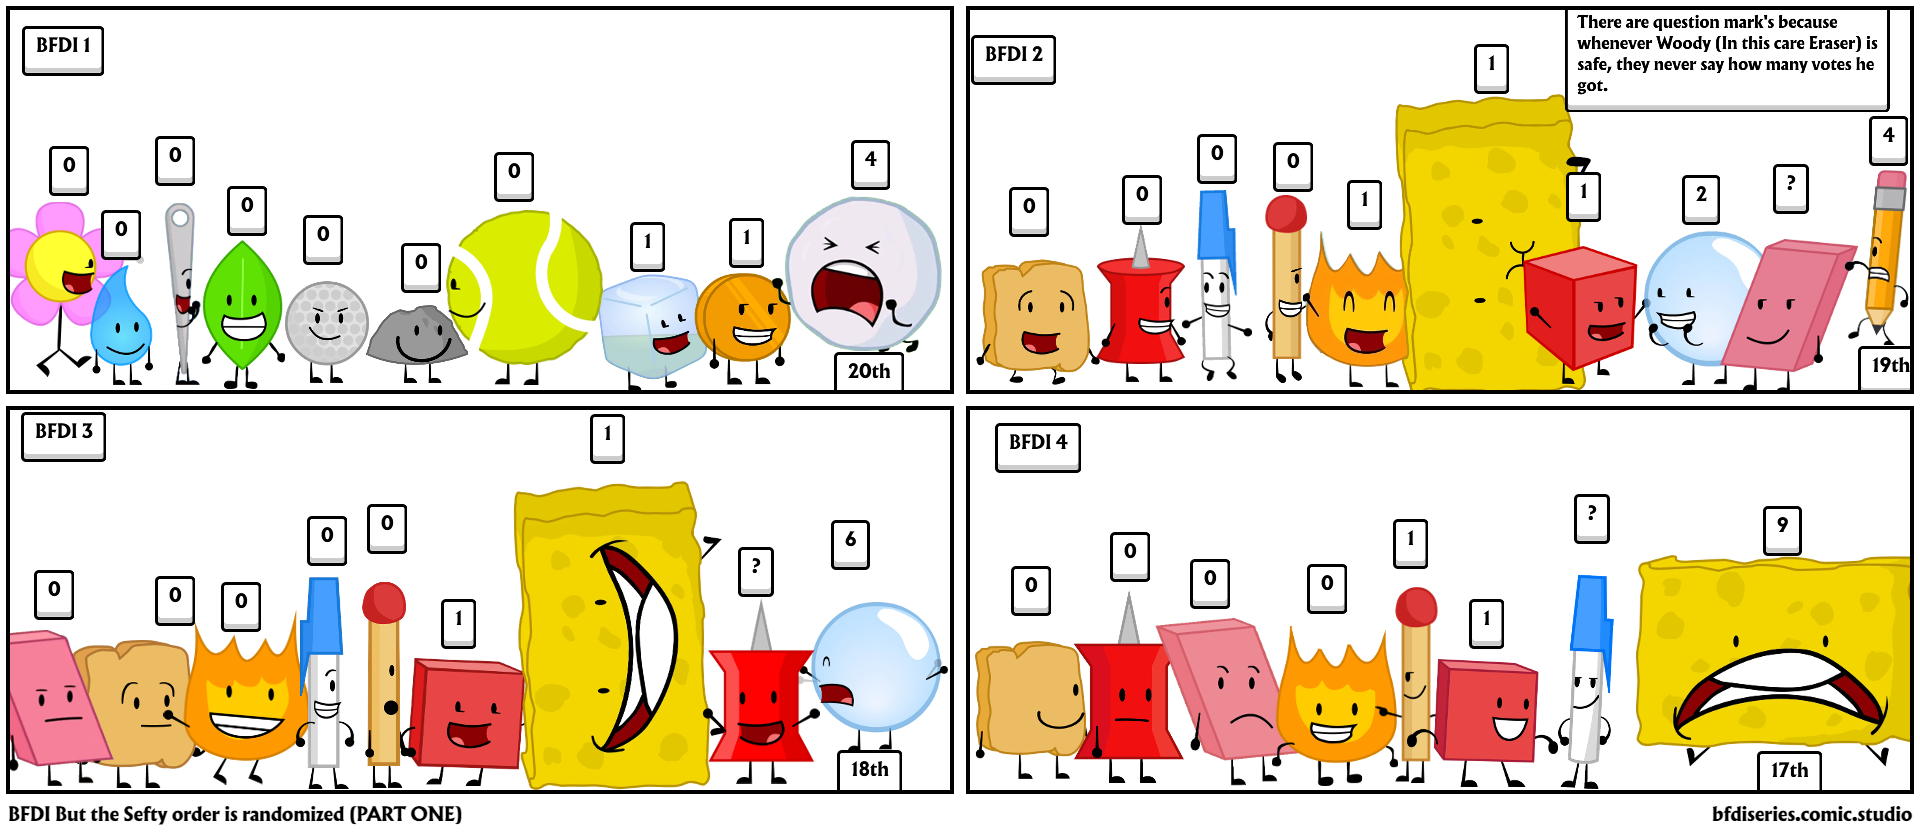 BFDI But the Sefty order is randomized (PART ONE)